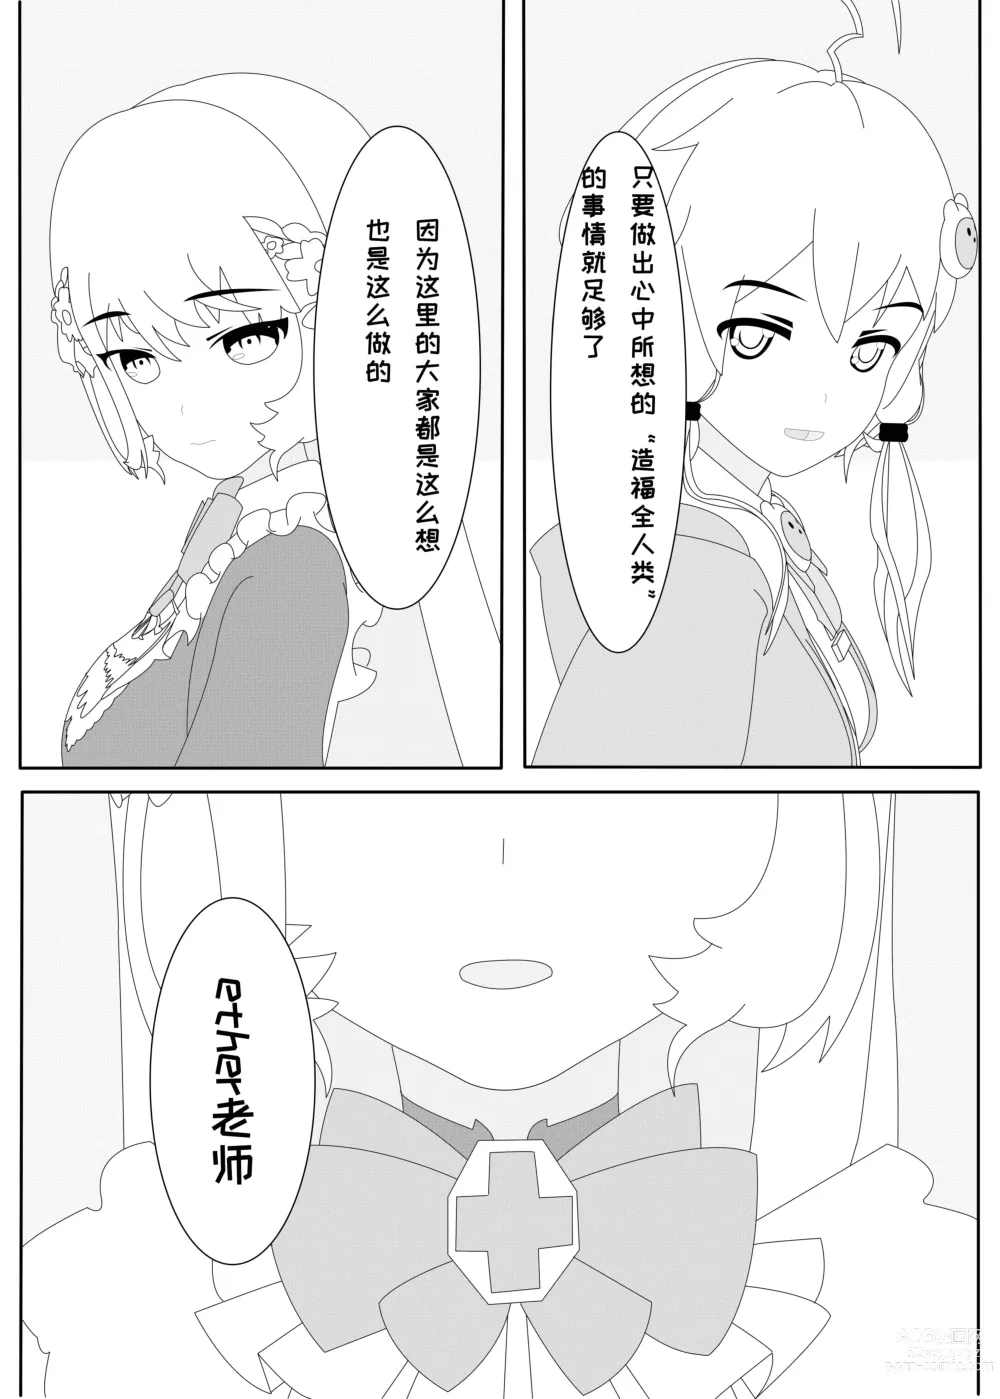 Page 12 of doujinshi 鲸之恋2（西丝特Xether）